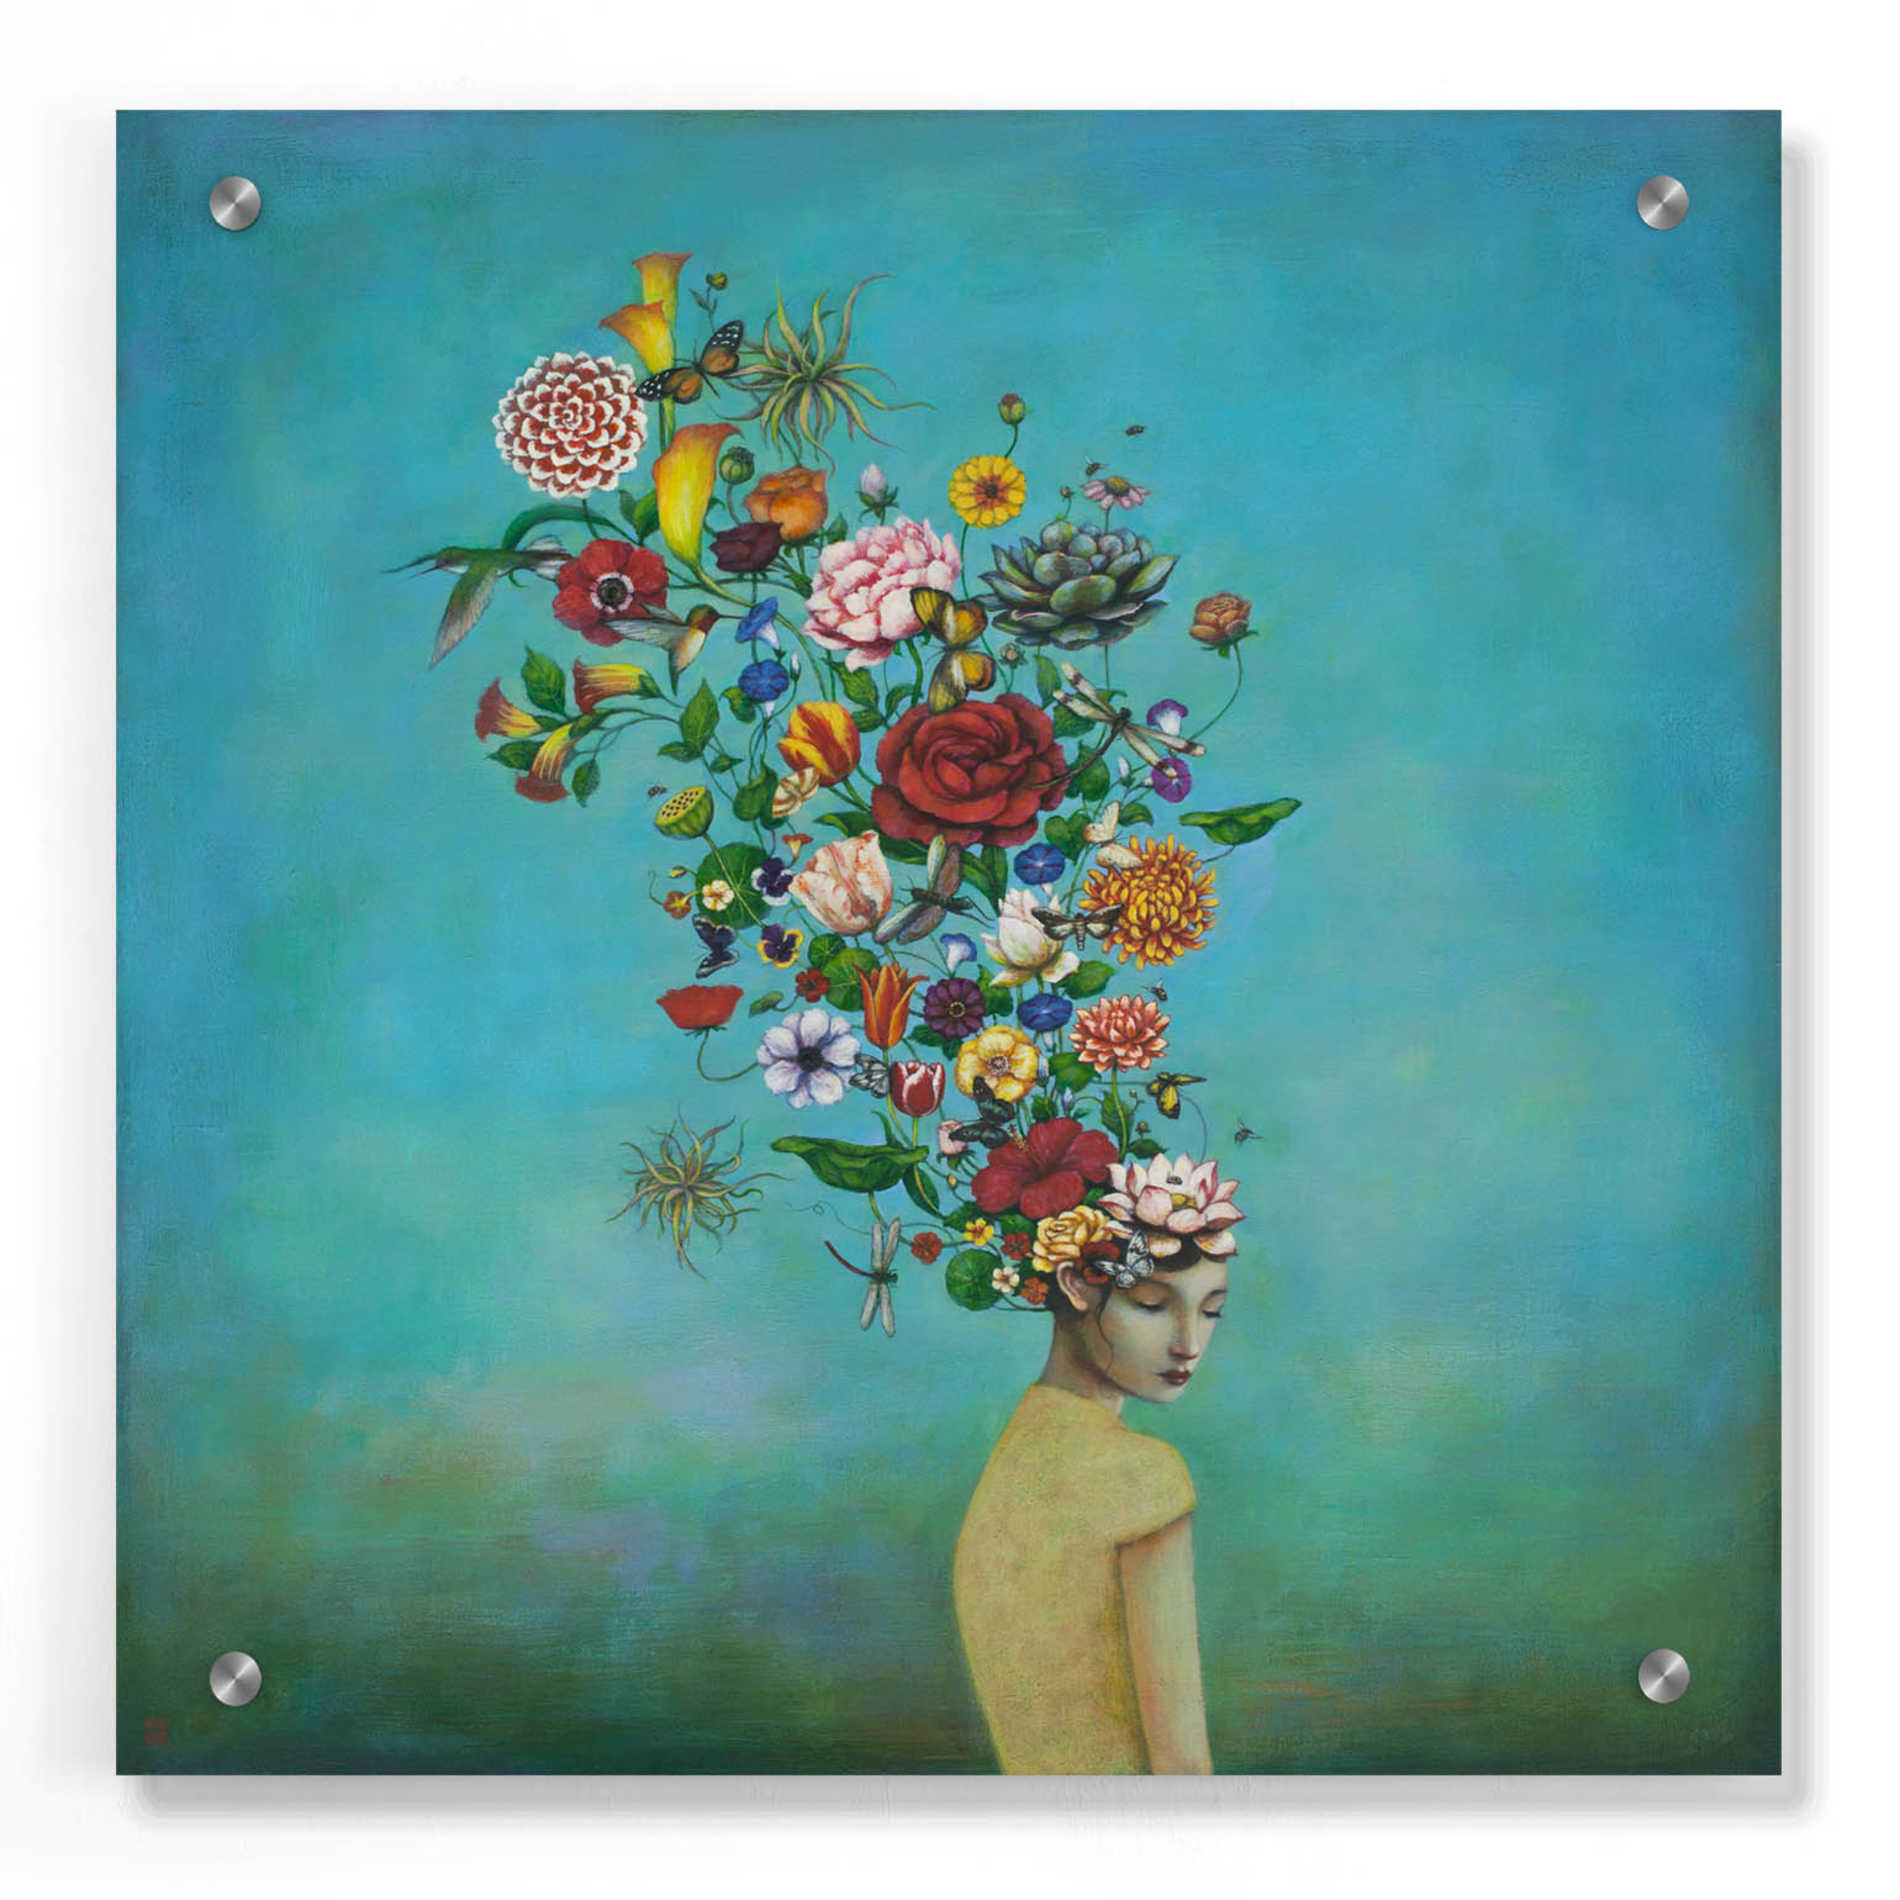 Epic Art 'A Mindful Garden' by Duy Huynh, Acrylic Glass Wall Art,36x36